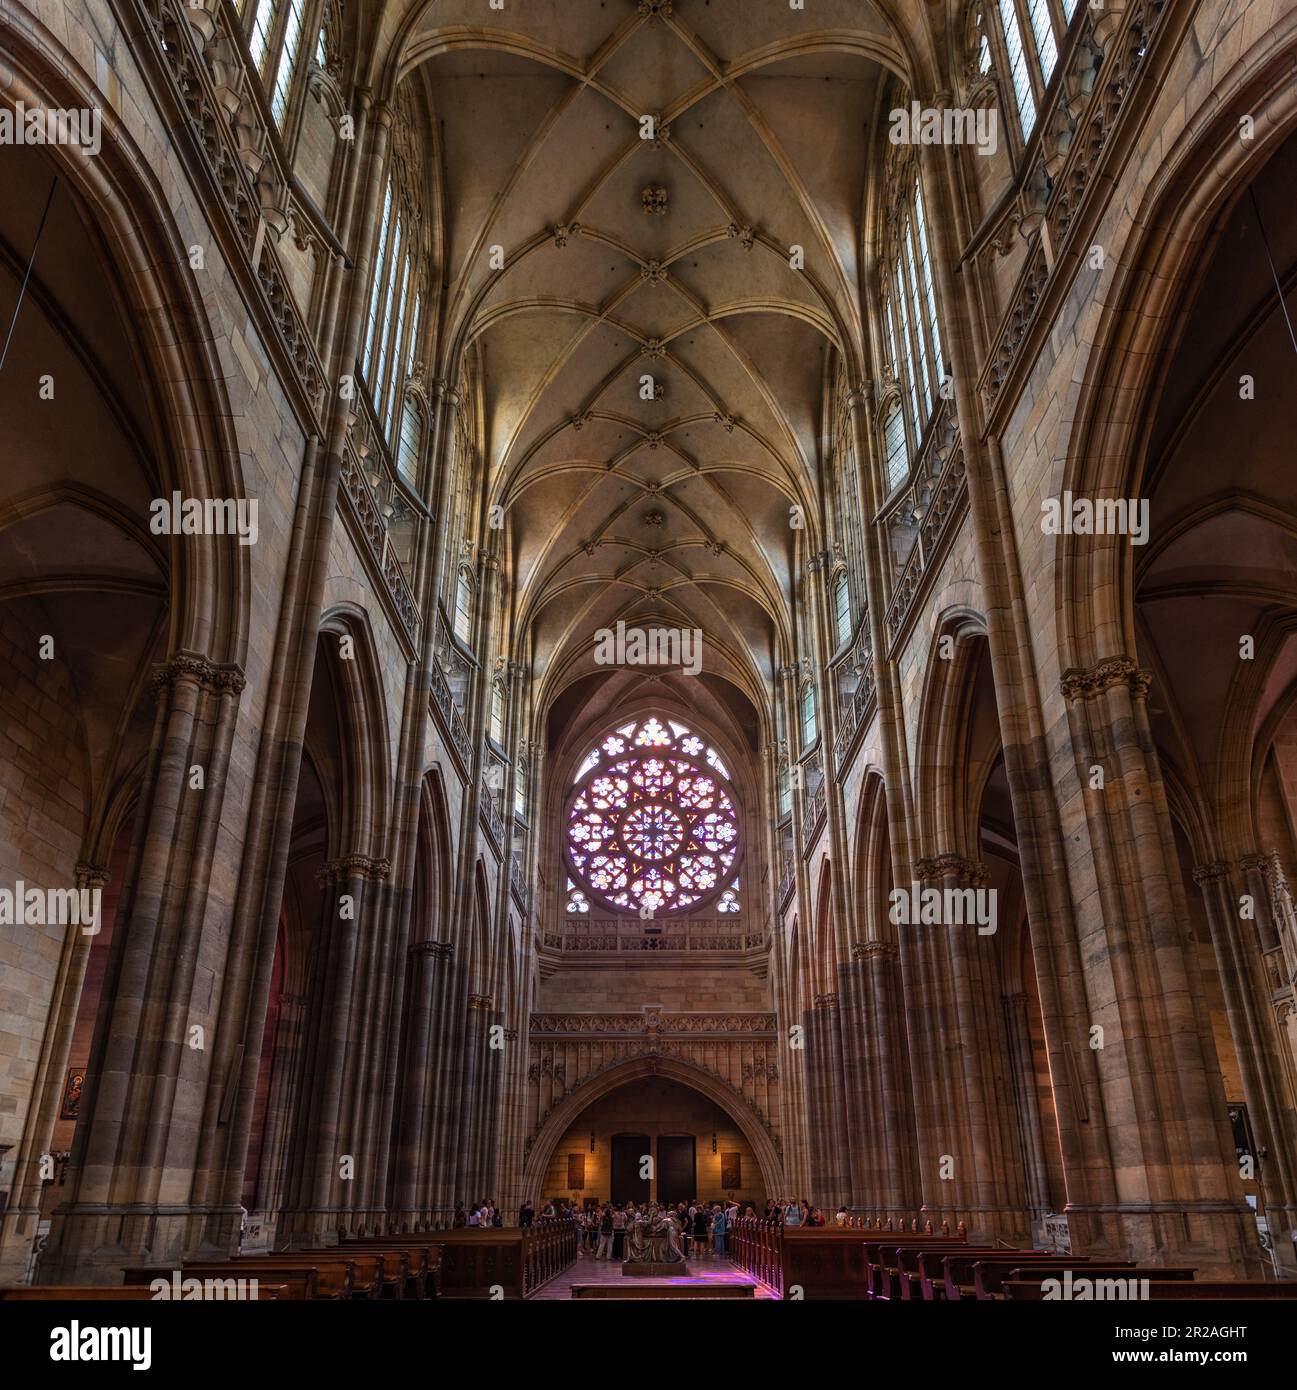 PRAGUE, CZECH REPUBLIC - AUGUST 25, 2022: Inside view of the main nave of St. Vitus Cathedral within the Prague Castle complex in the Czech Republic. Stock Photo